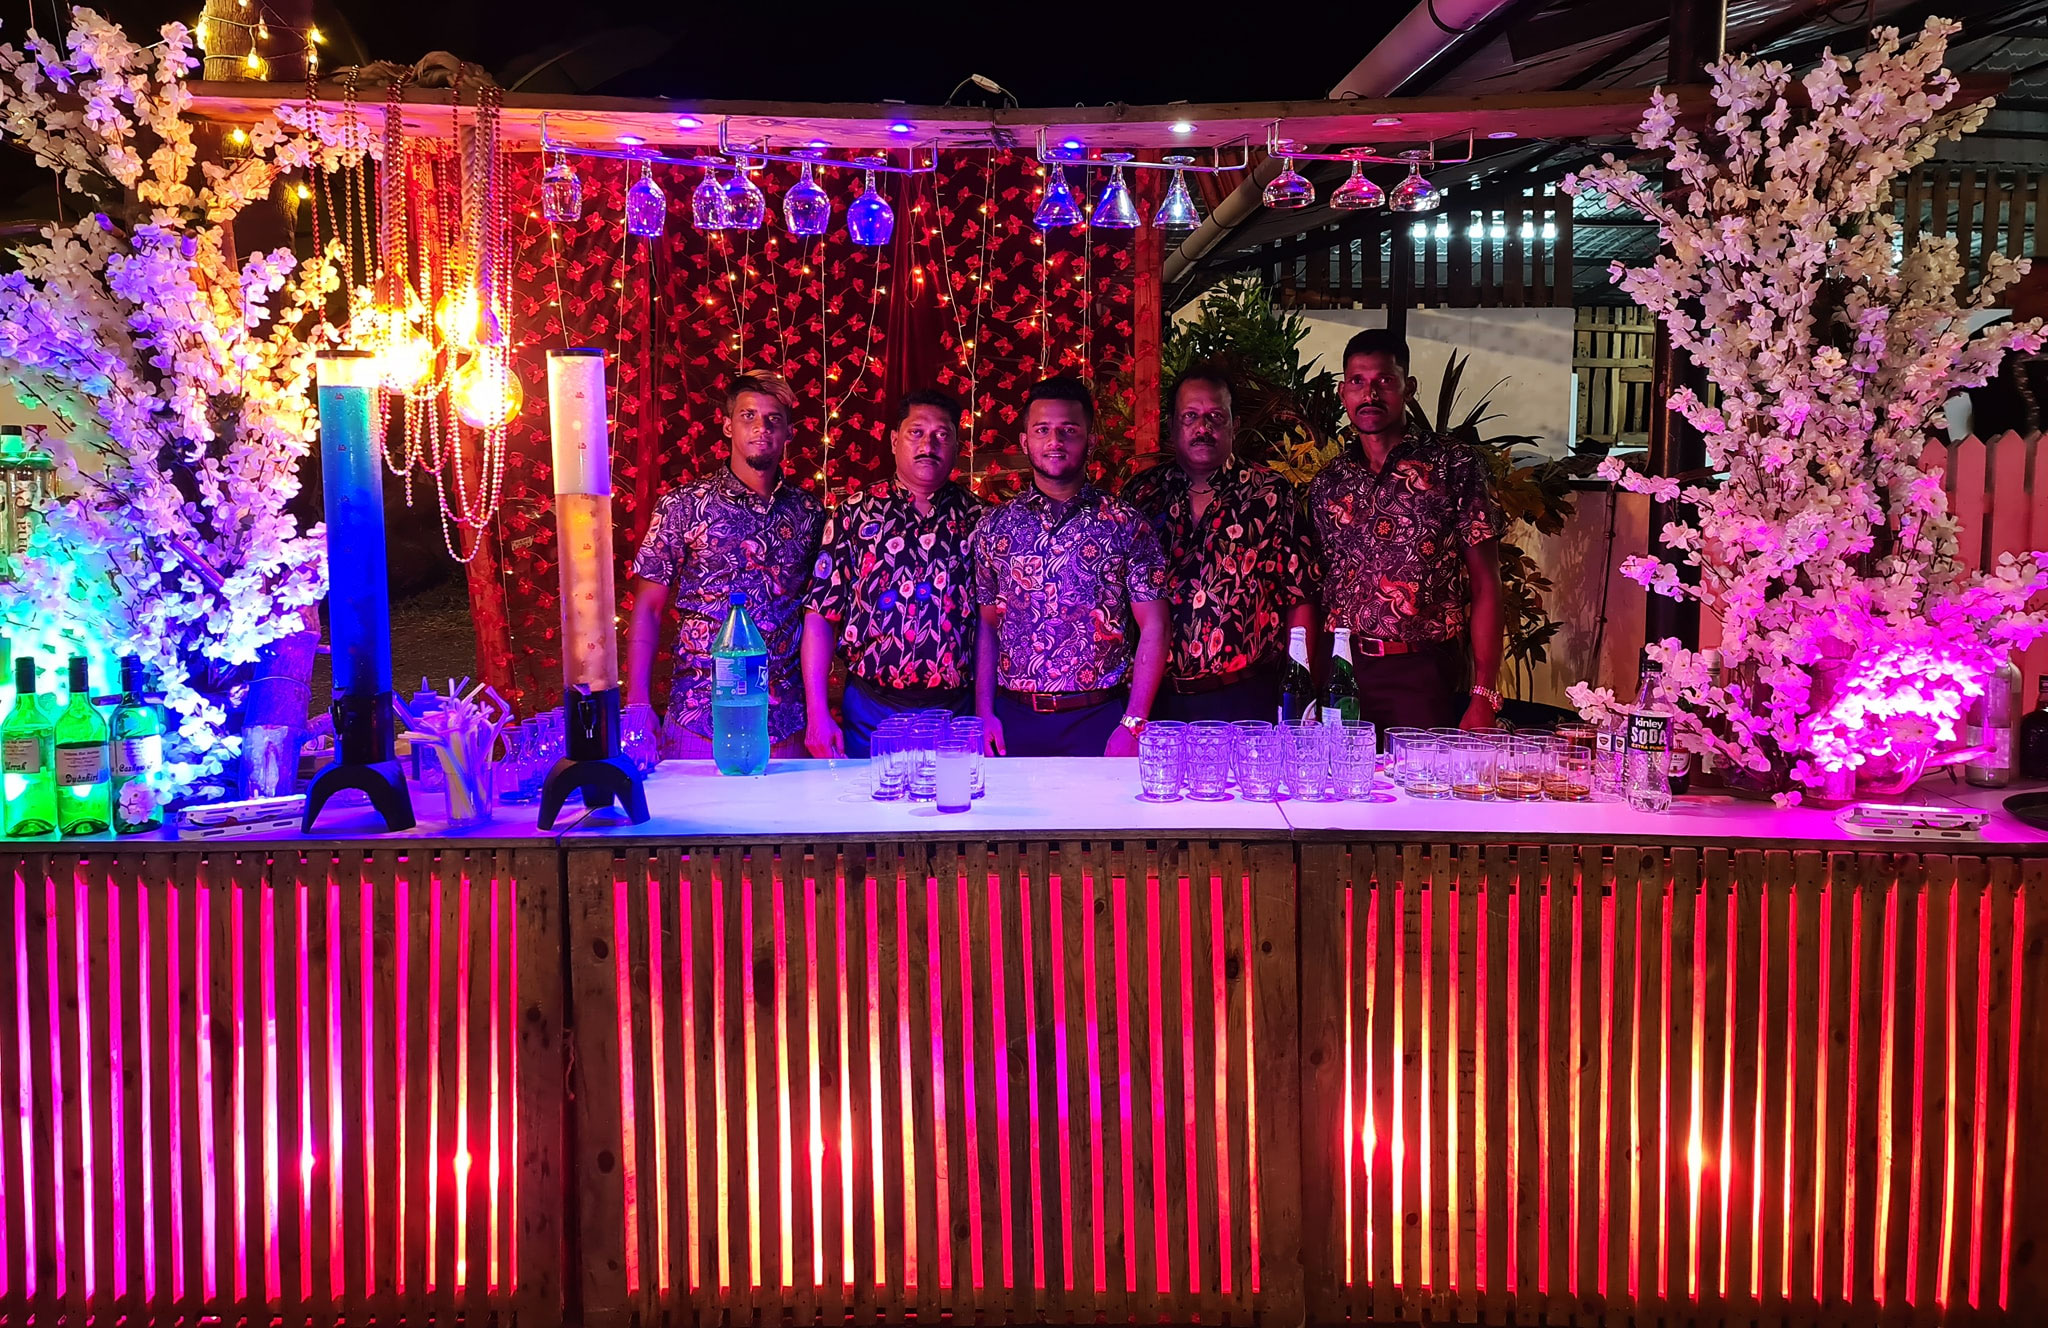 Melwin Cocktails & Mocktails - Bar Services for Weddings, Parties & Other Events in Goa